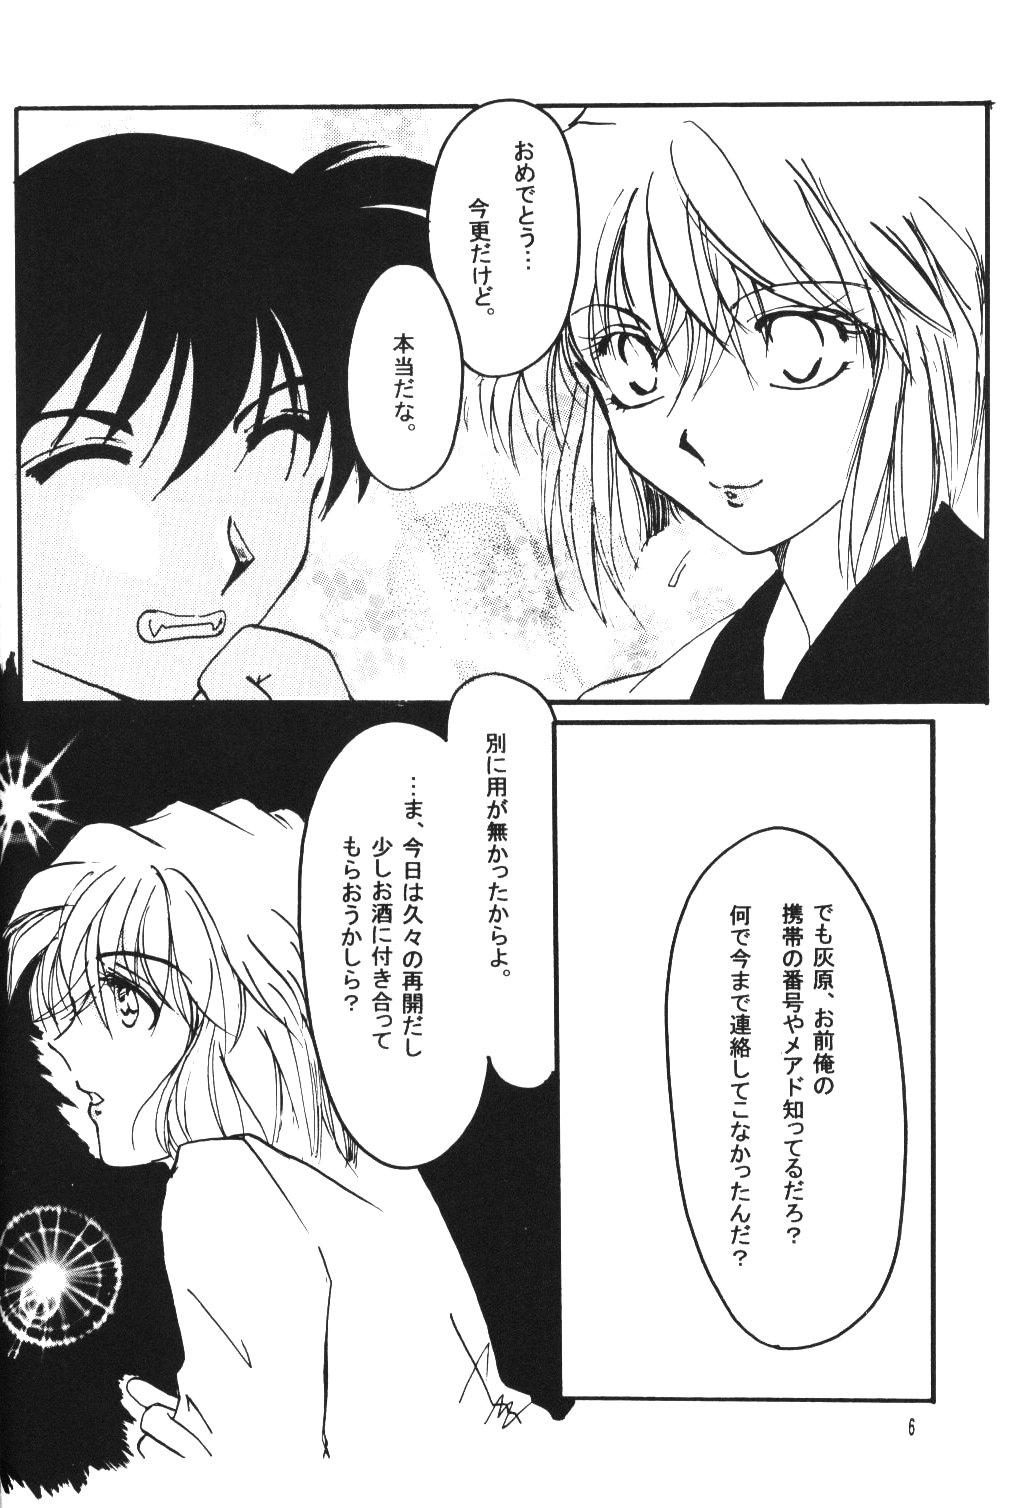 She Over Drive - Detective conan Salope - Page 5